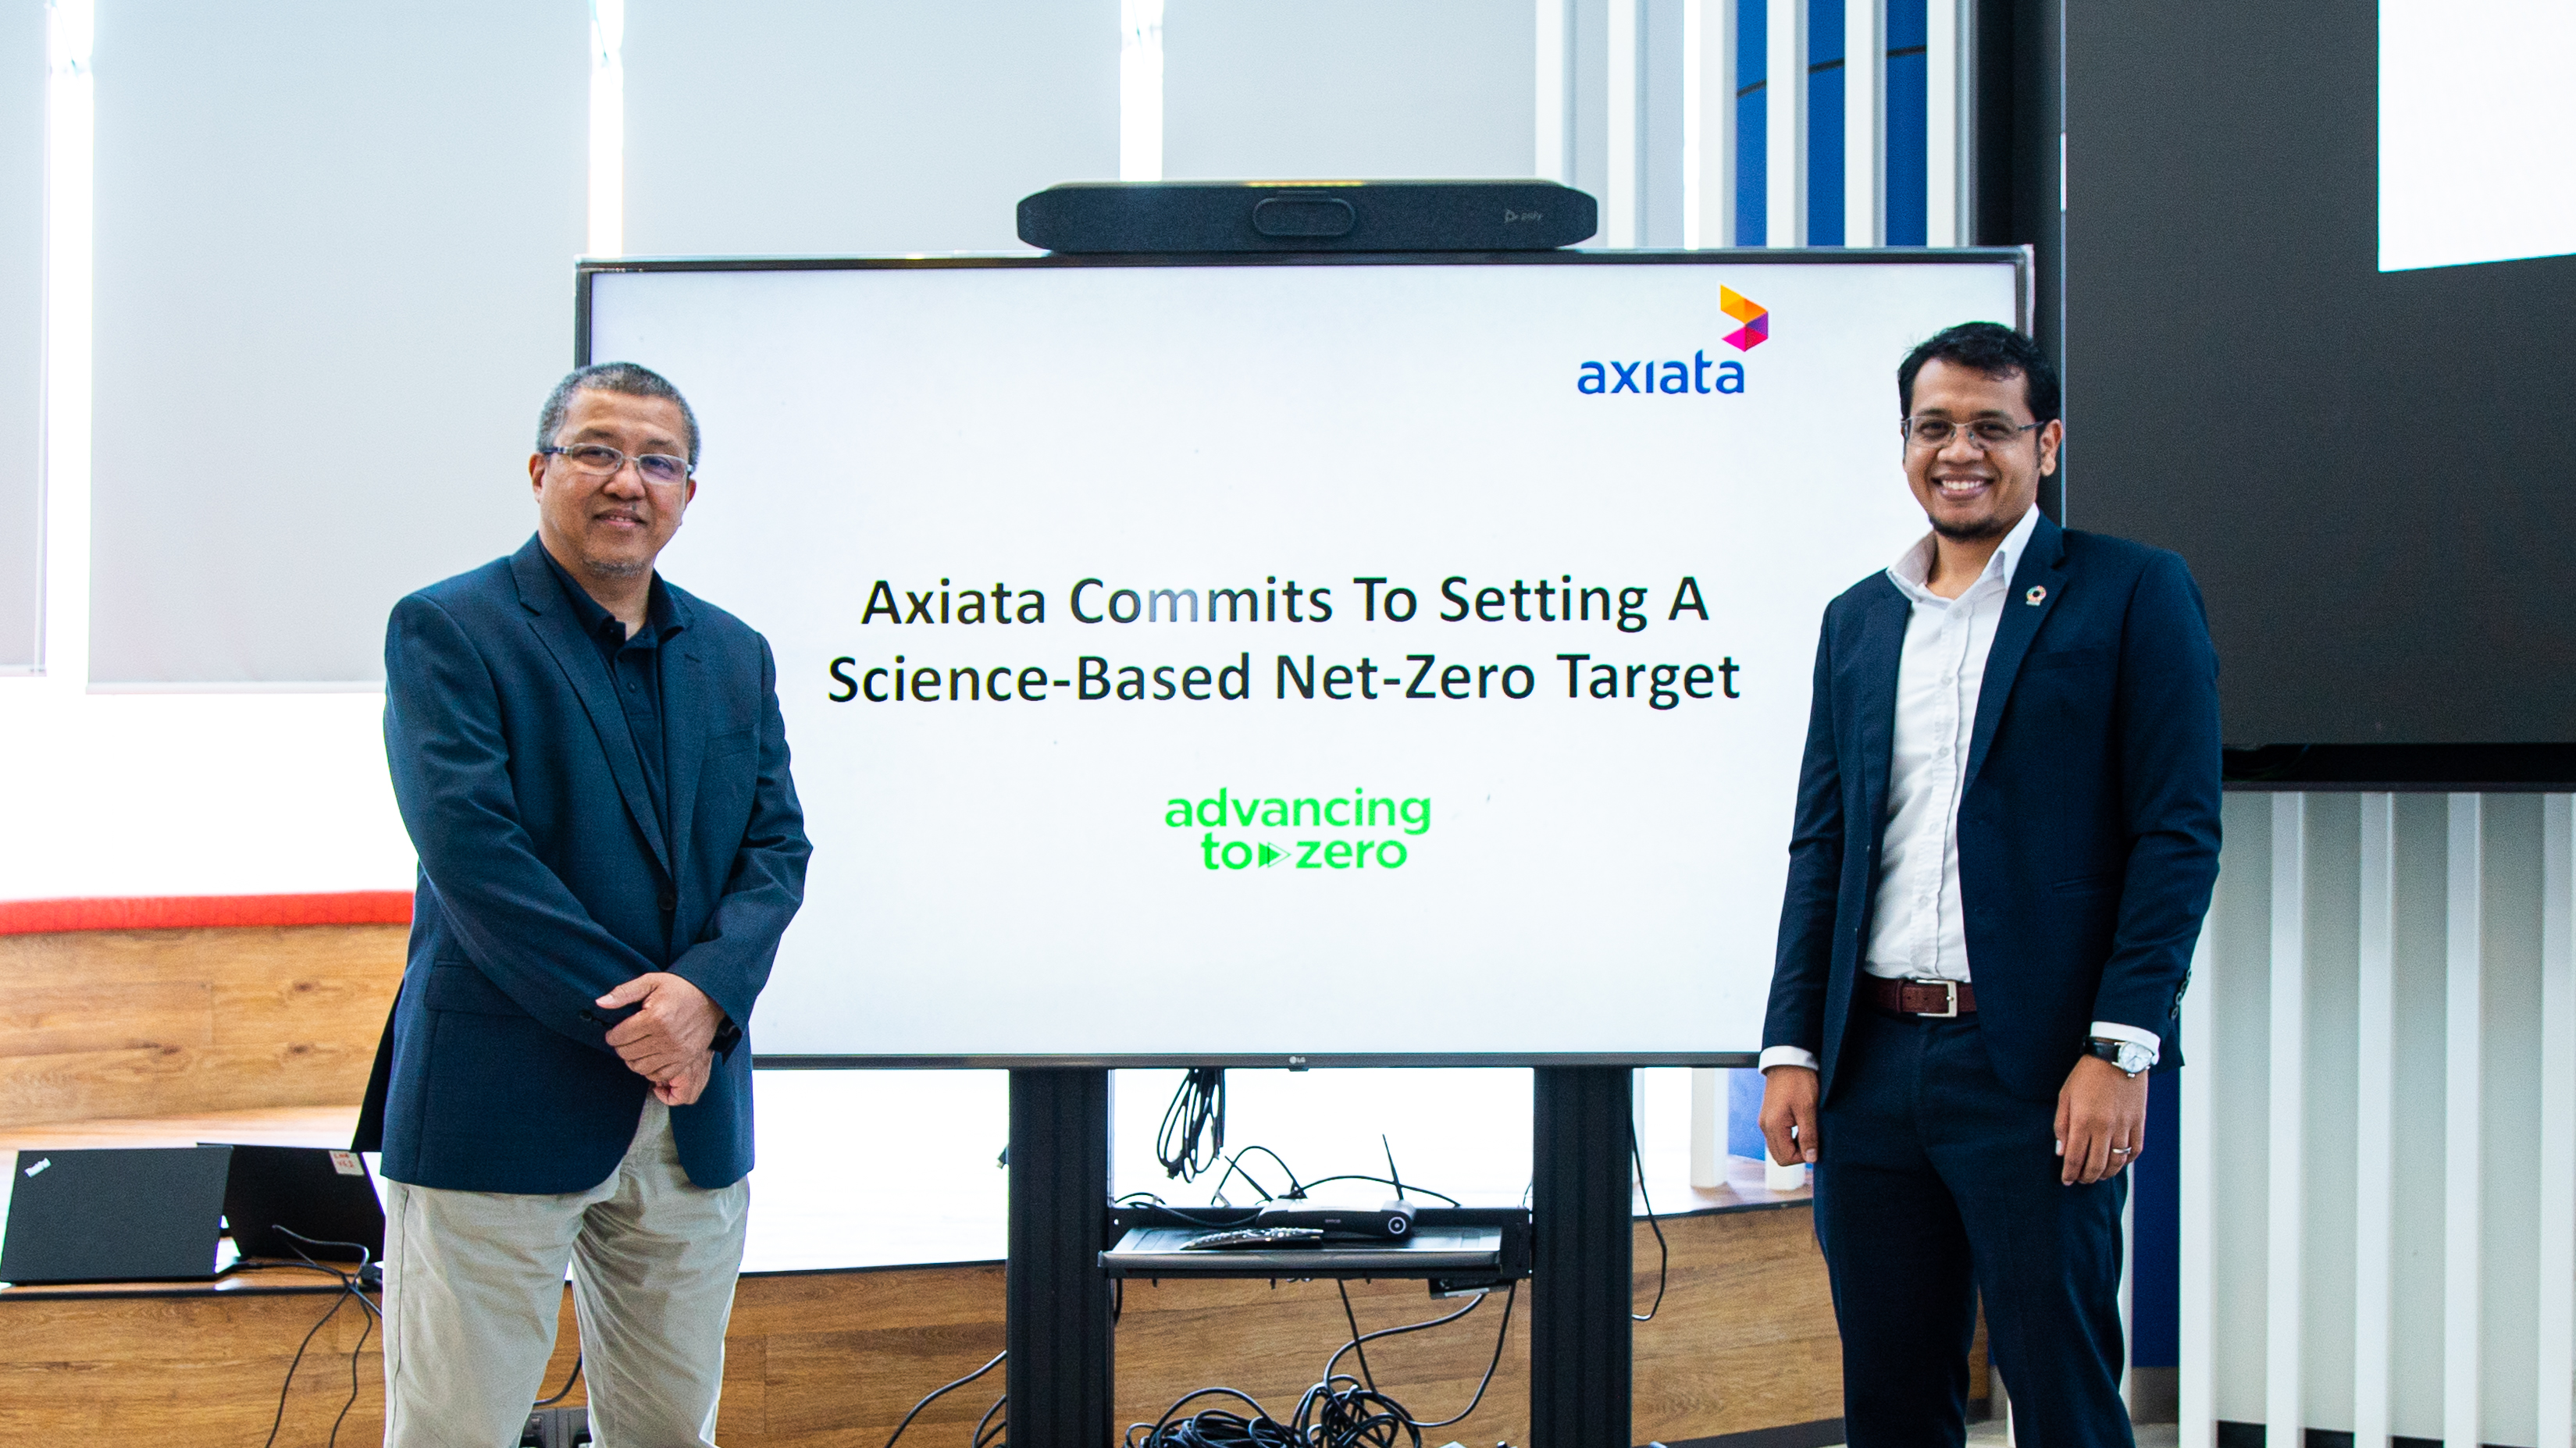 Axiata commits to Net Zero, signs science-based target initiative business pledge